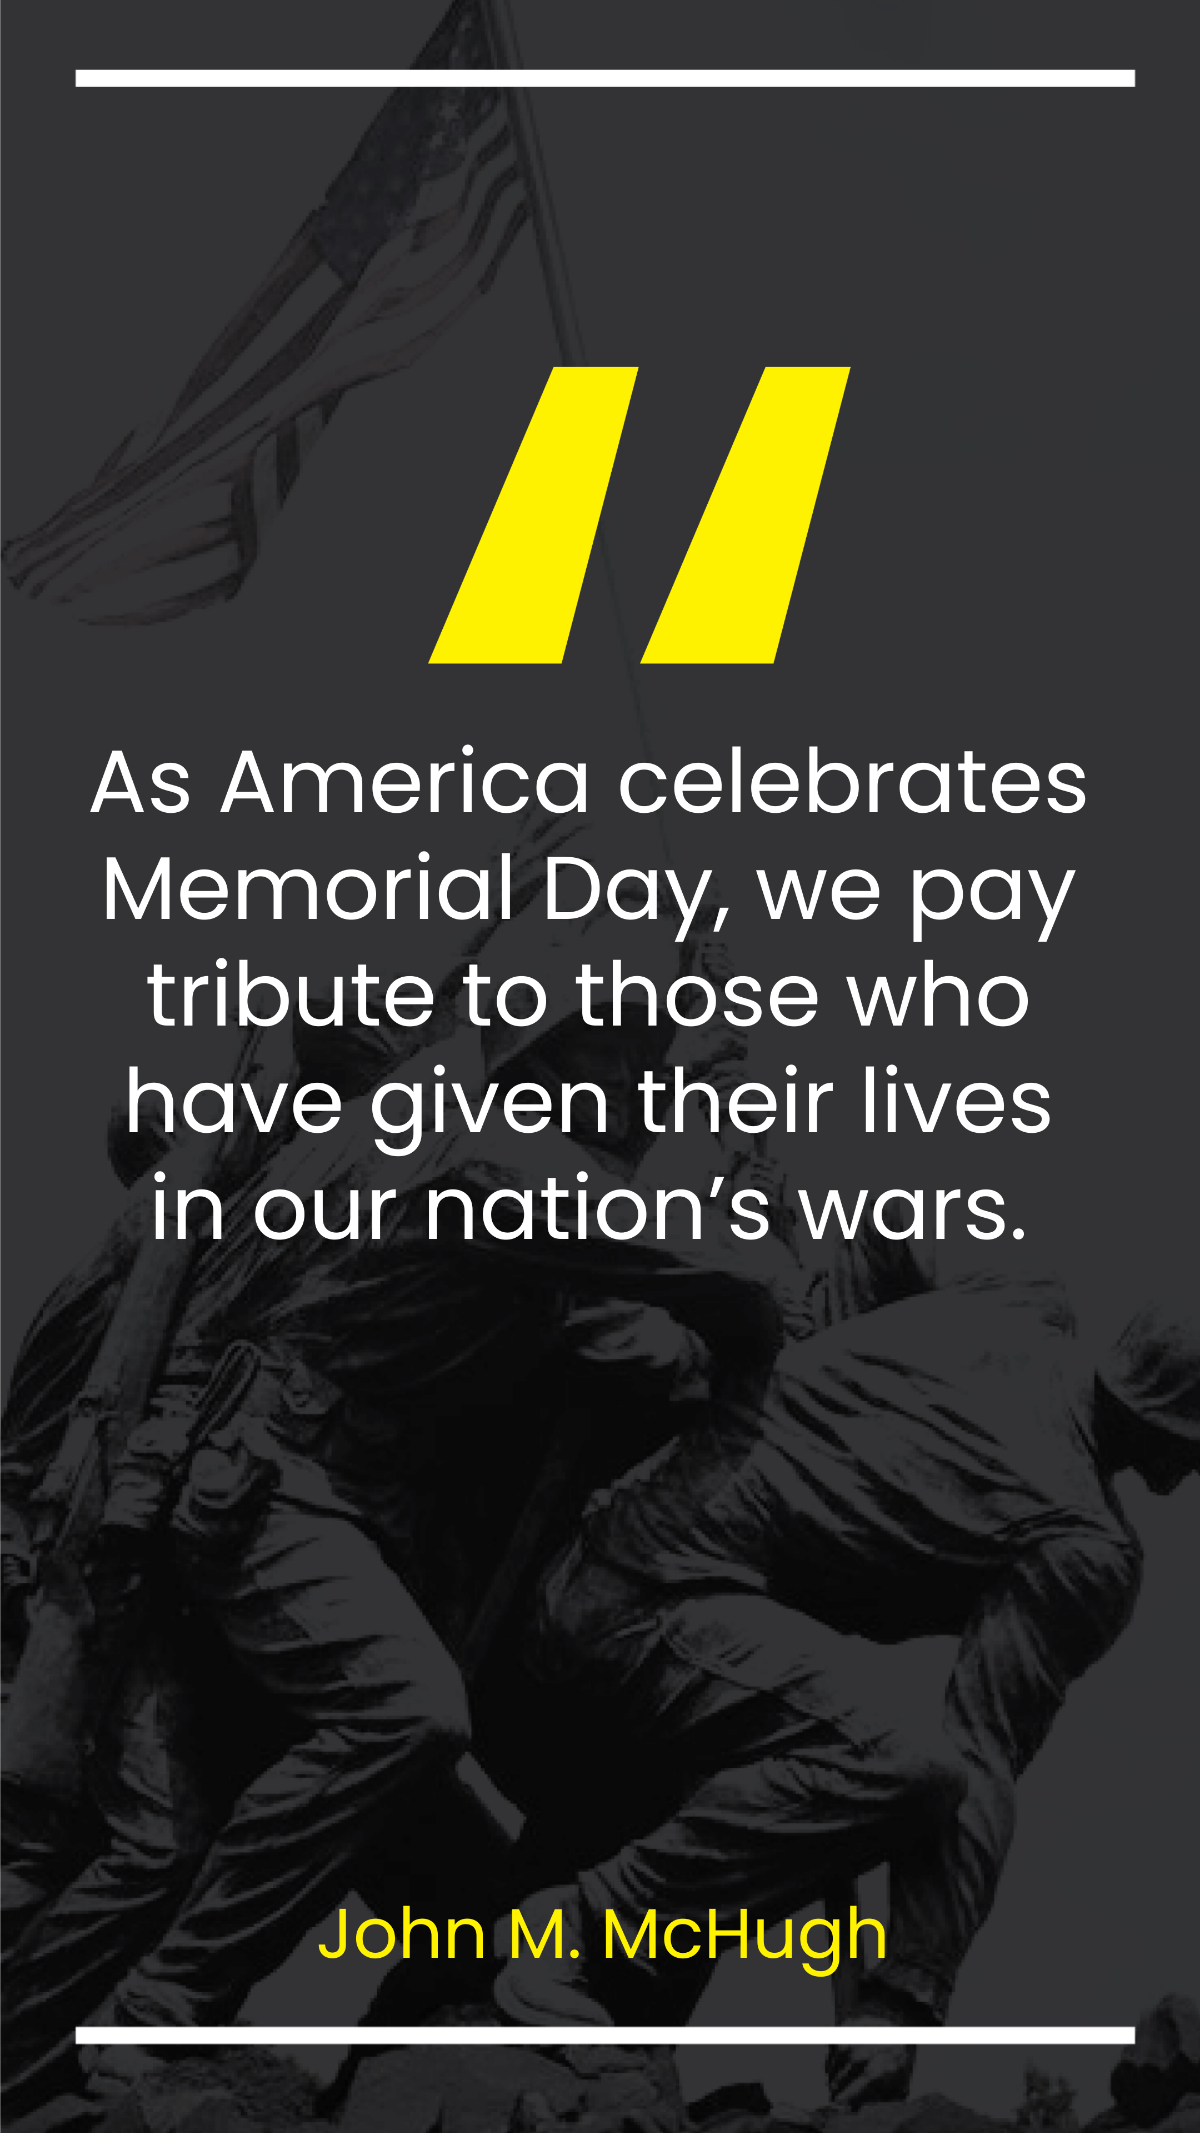 John M. McHugh - As America celebrates Memorial Day, we pay tribute to those who have given their lives in our nation's wars. Template